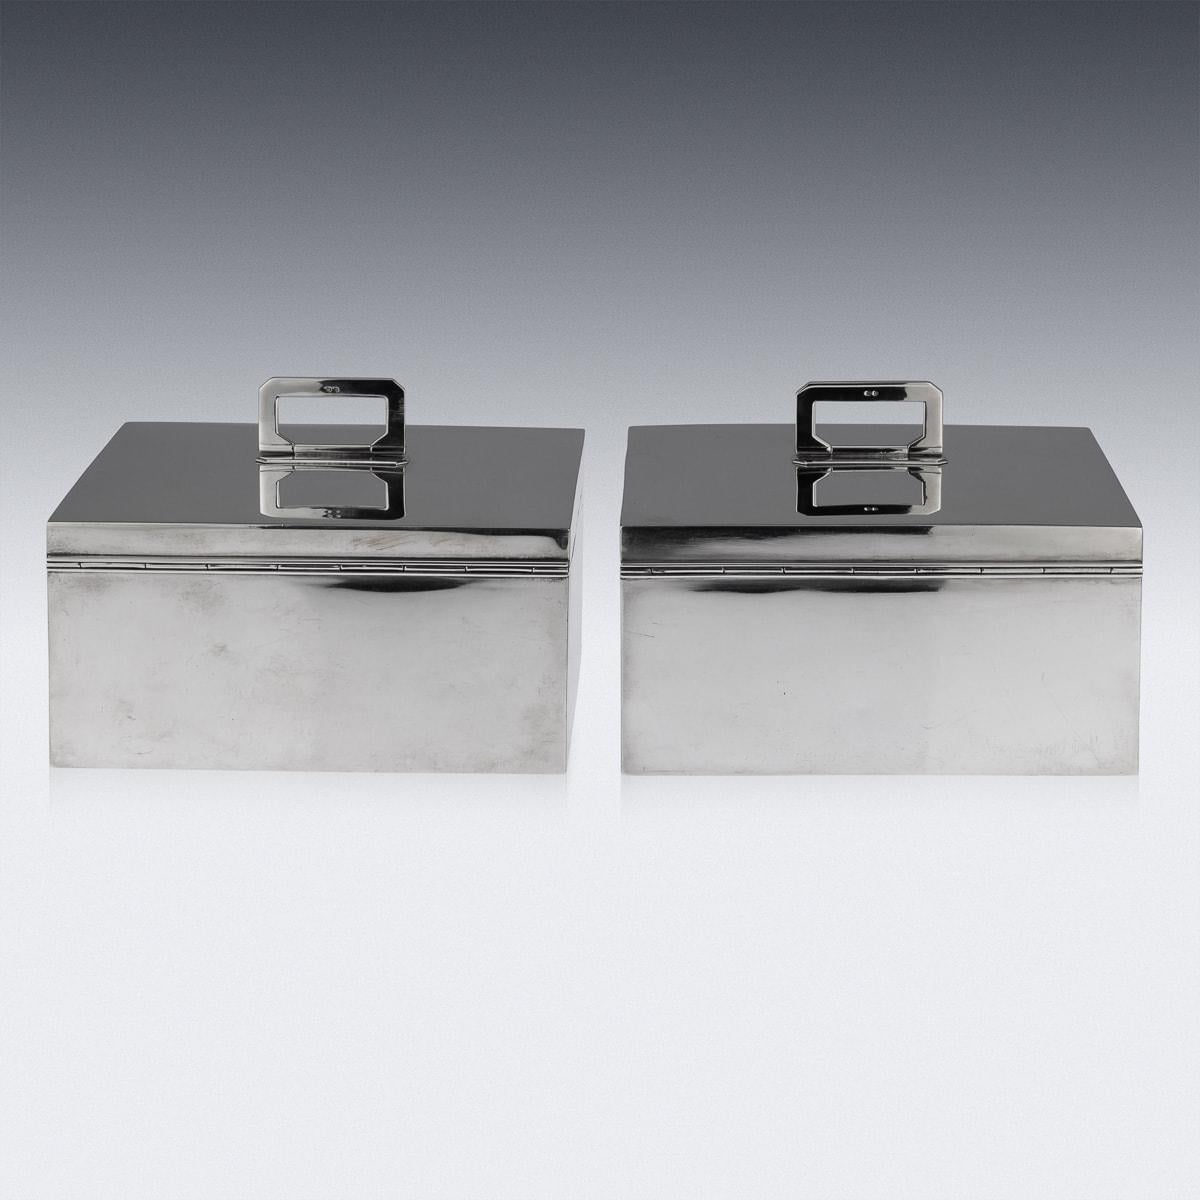 20th Century Art Deco Pair Of Solid Silver Cigar Boxes, Asprey & Co, c.1936 For Sale 1